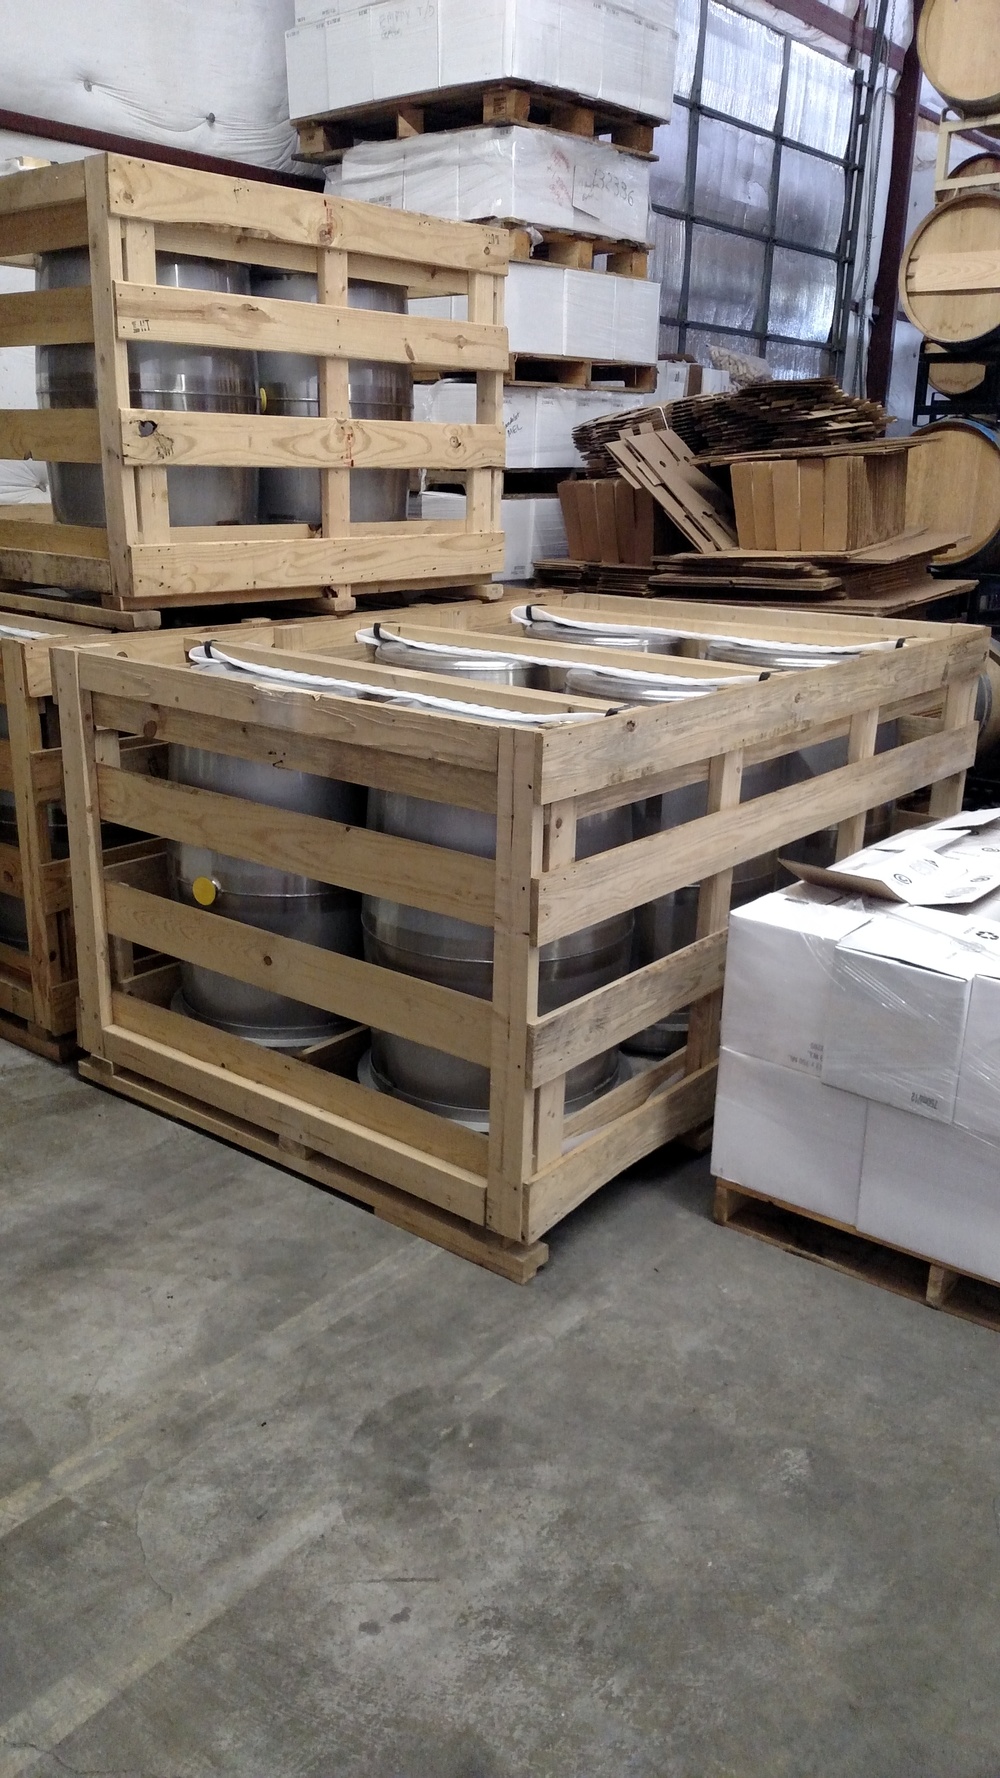 Newly arrived stainless barrels still in their crates